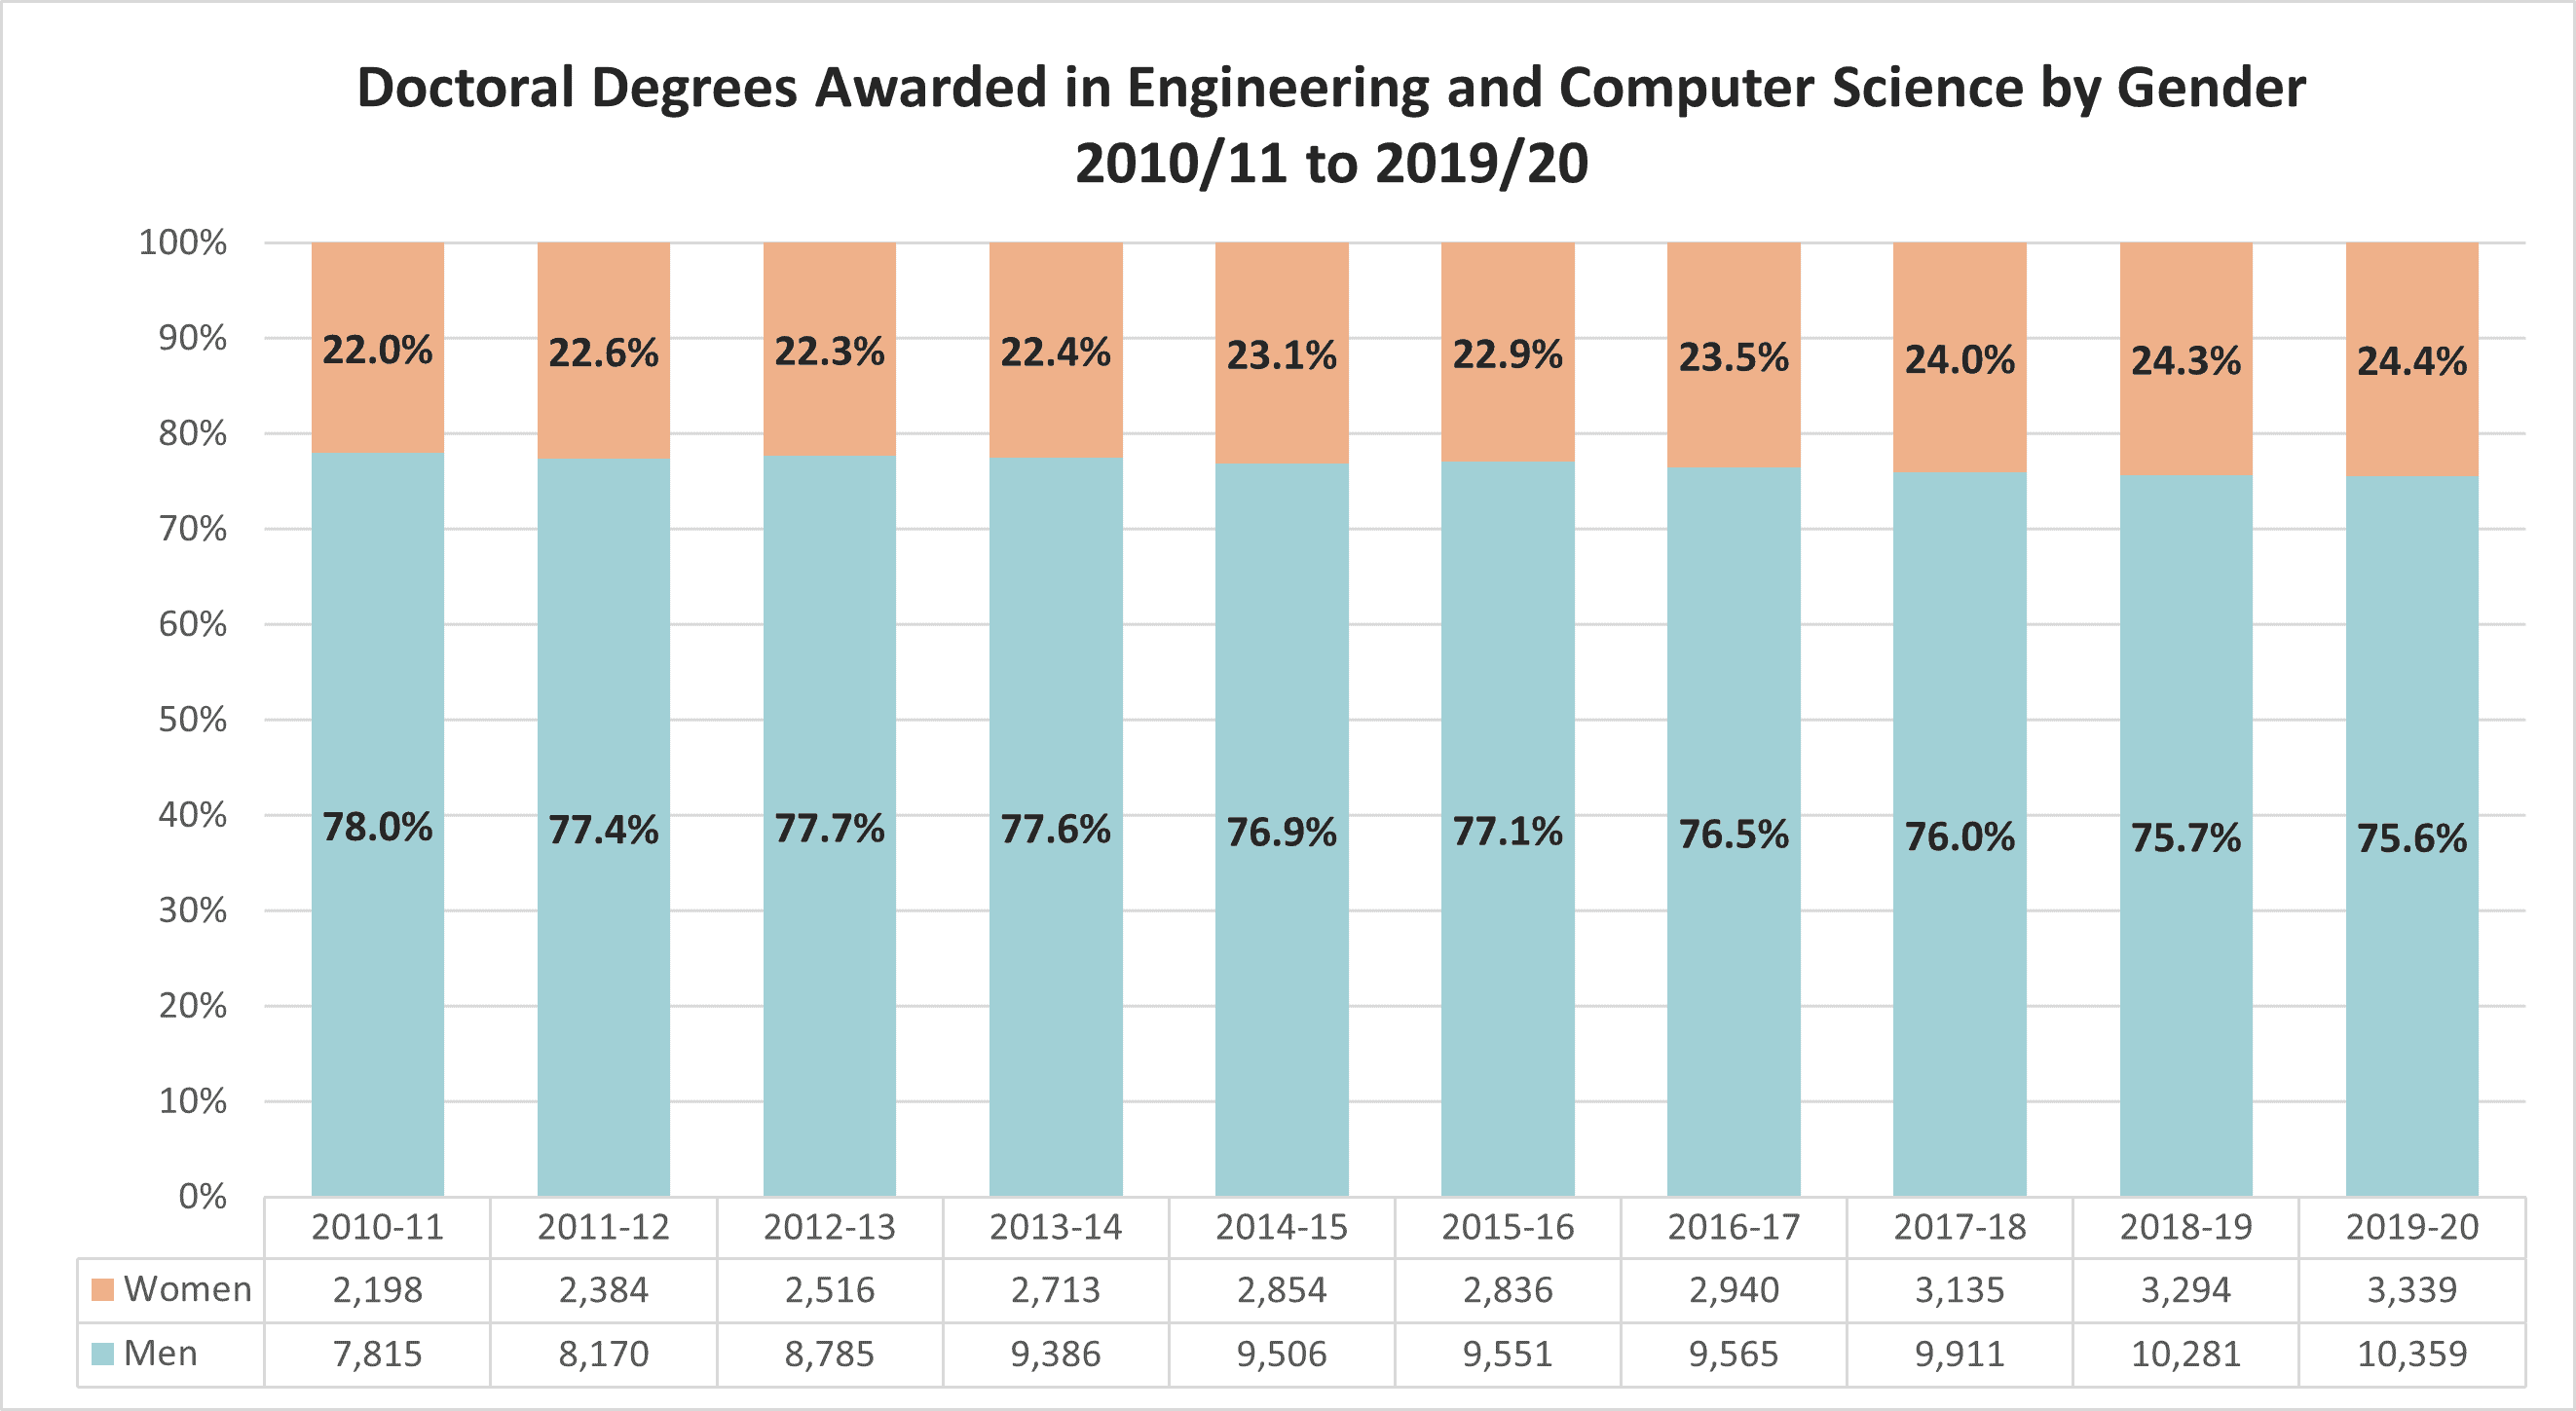 Percent of doctoral degrees awarded in engineering and computer science